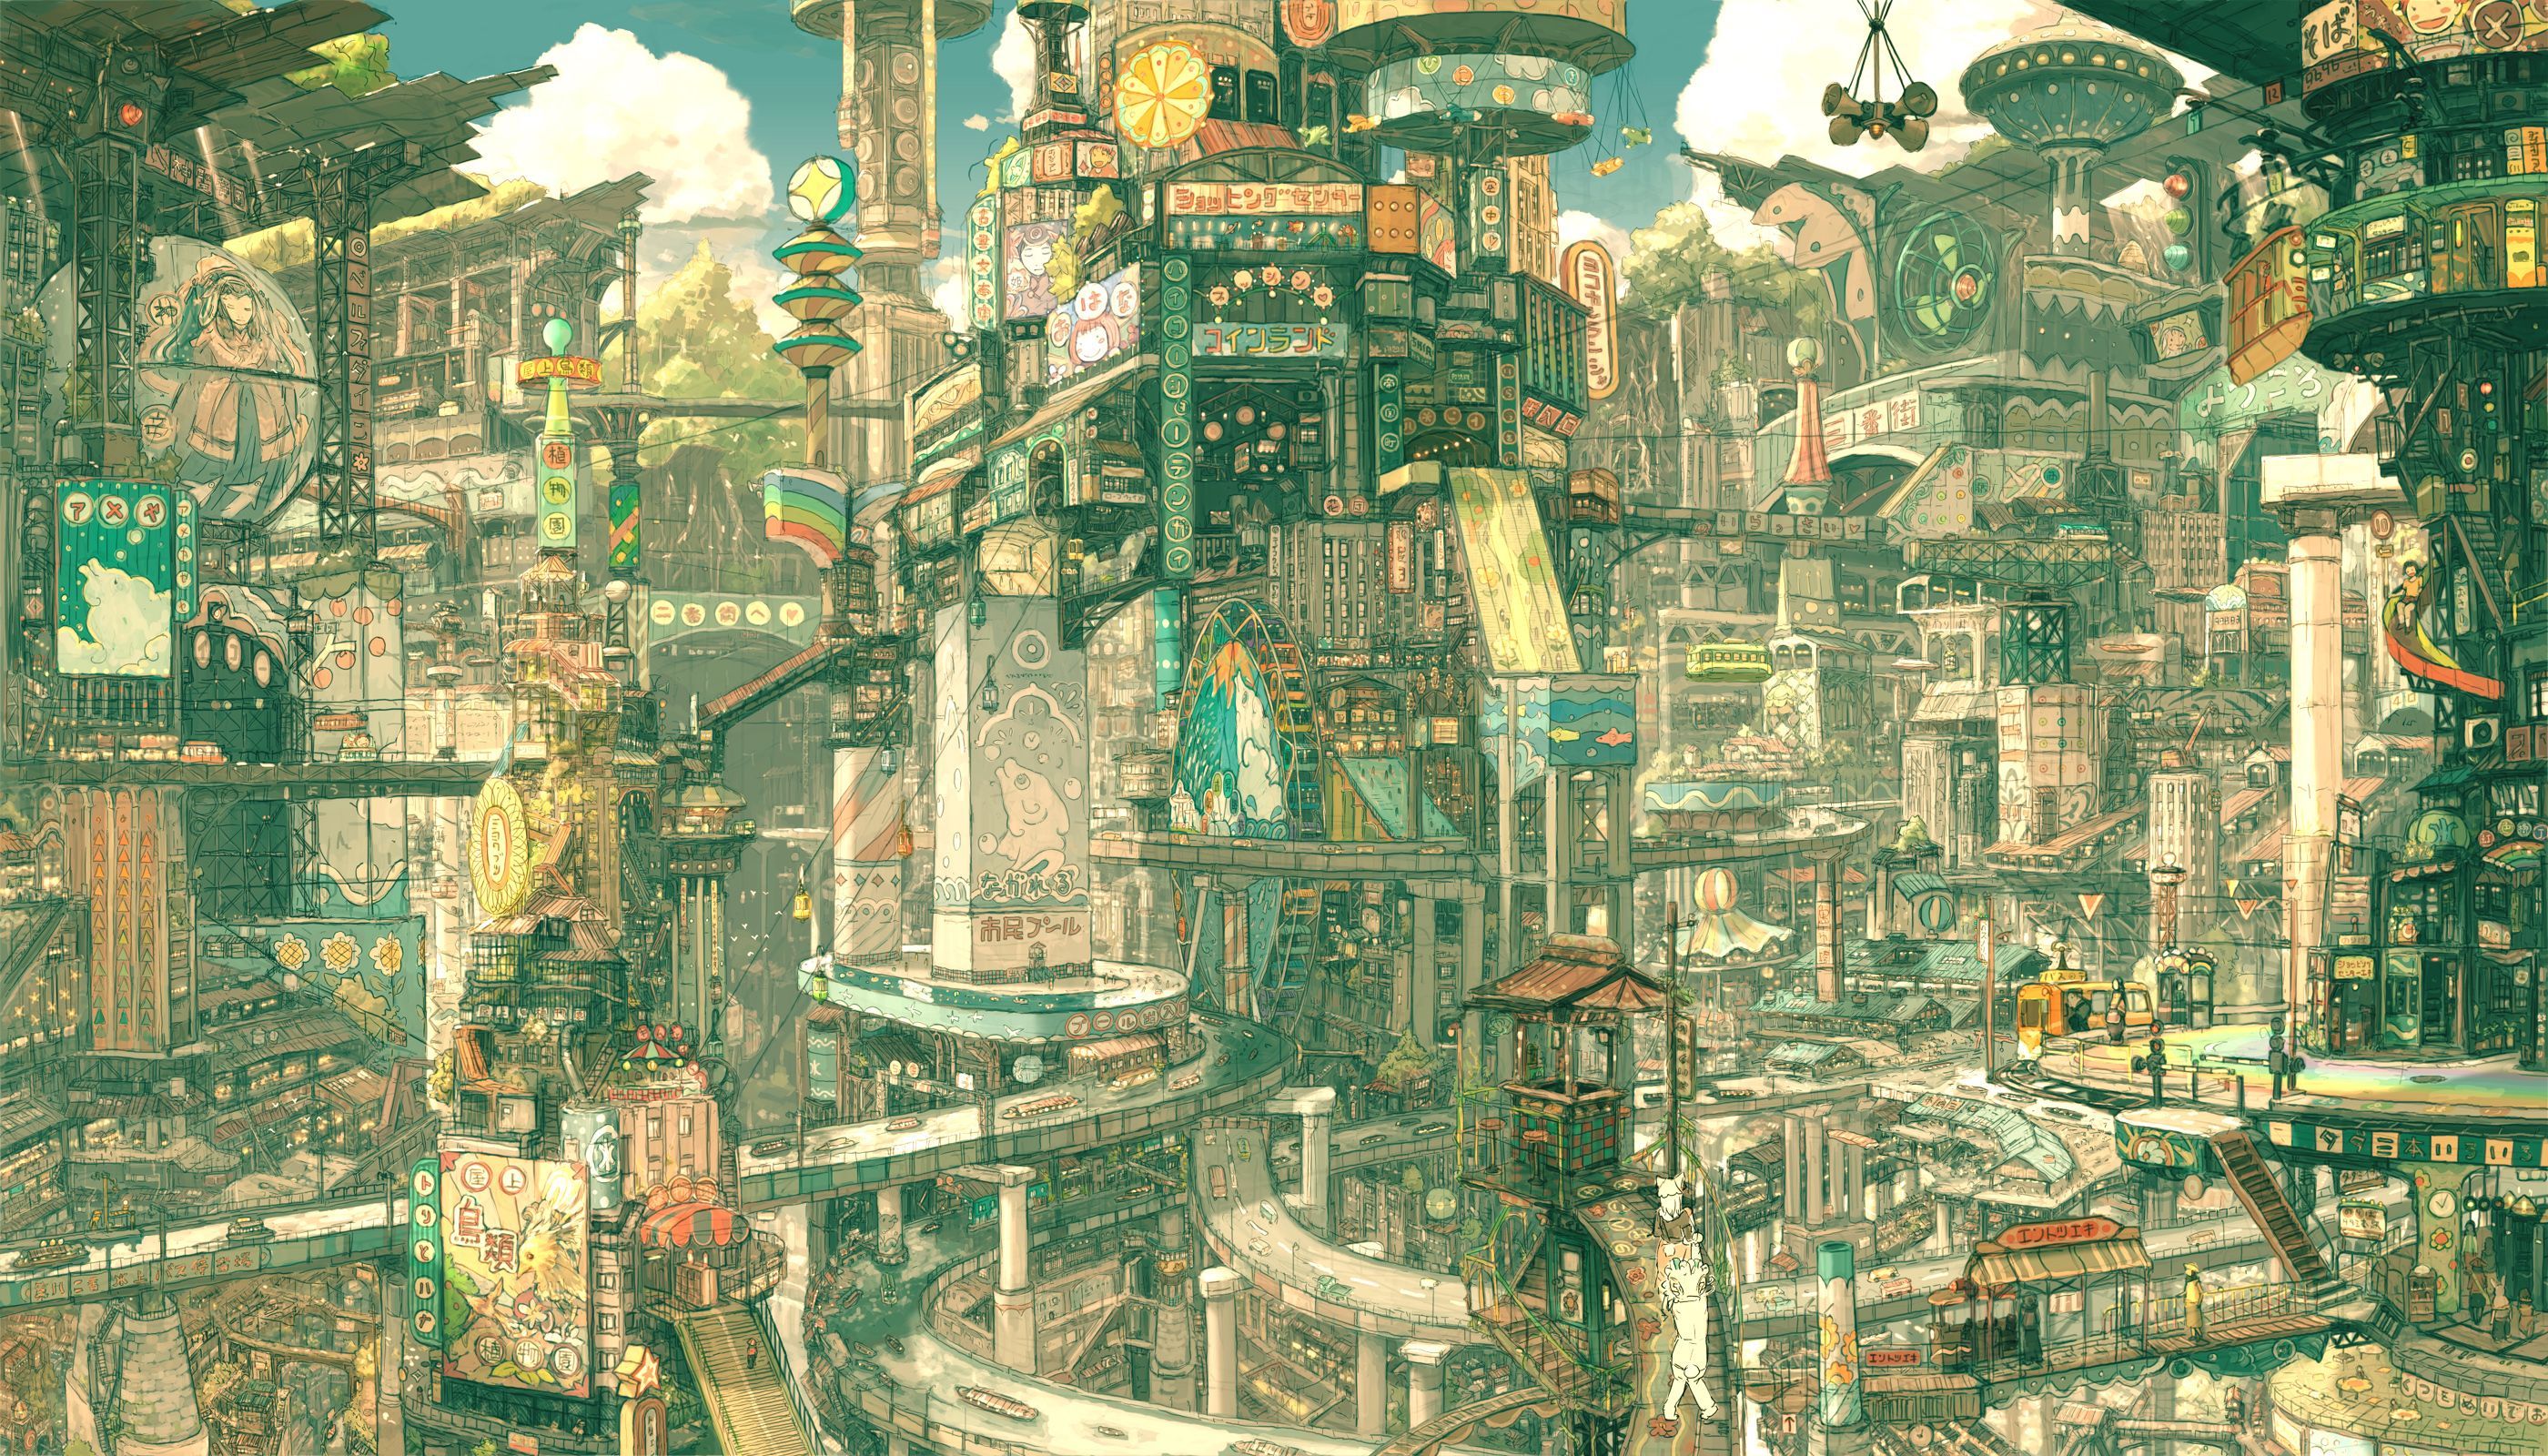 A city made of books, with people and animals going about their business. - Anime city